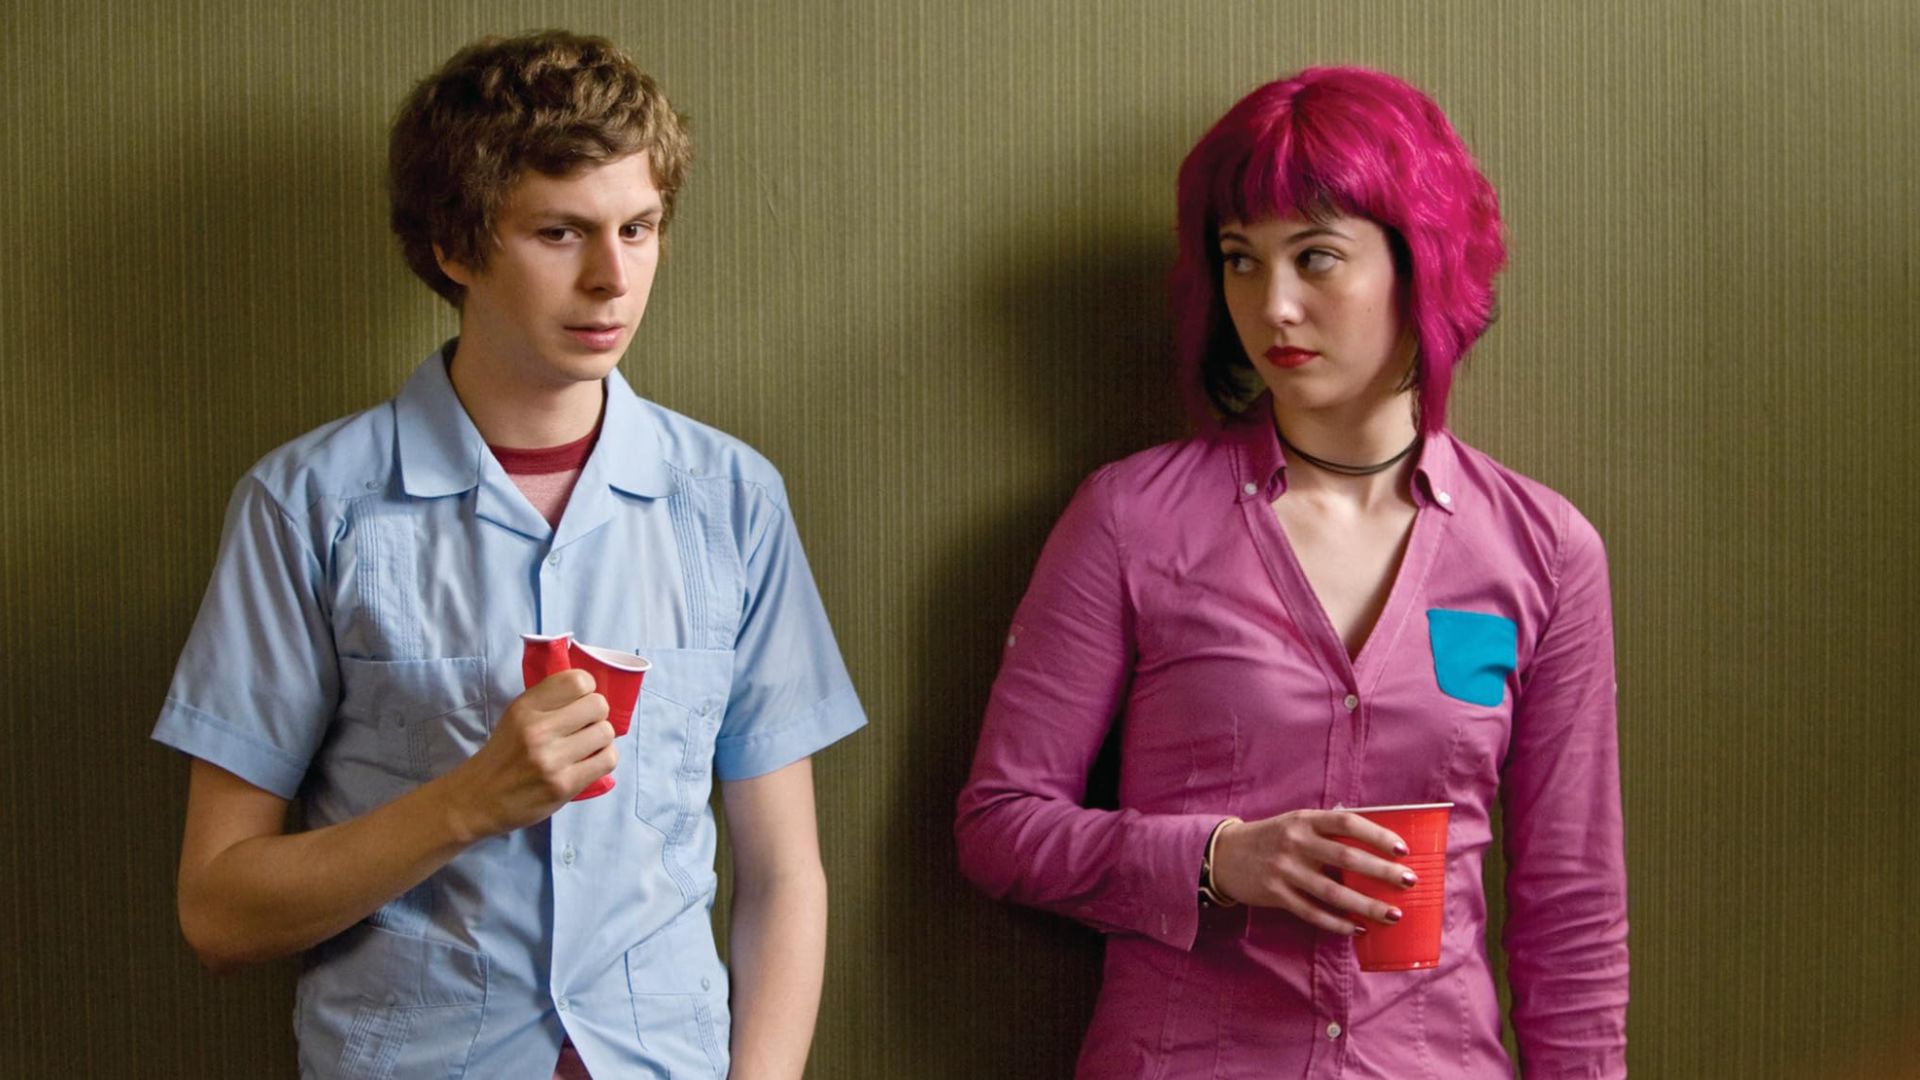 A young man and woman lean against a wall holding red party cups in this image from Universal Pictures.